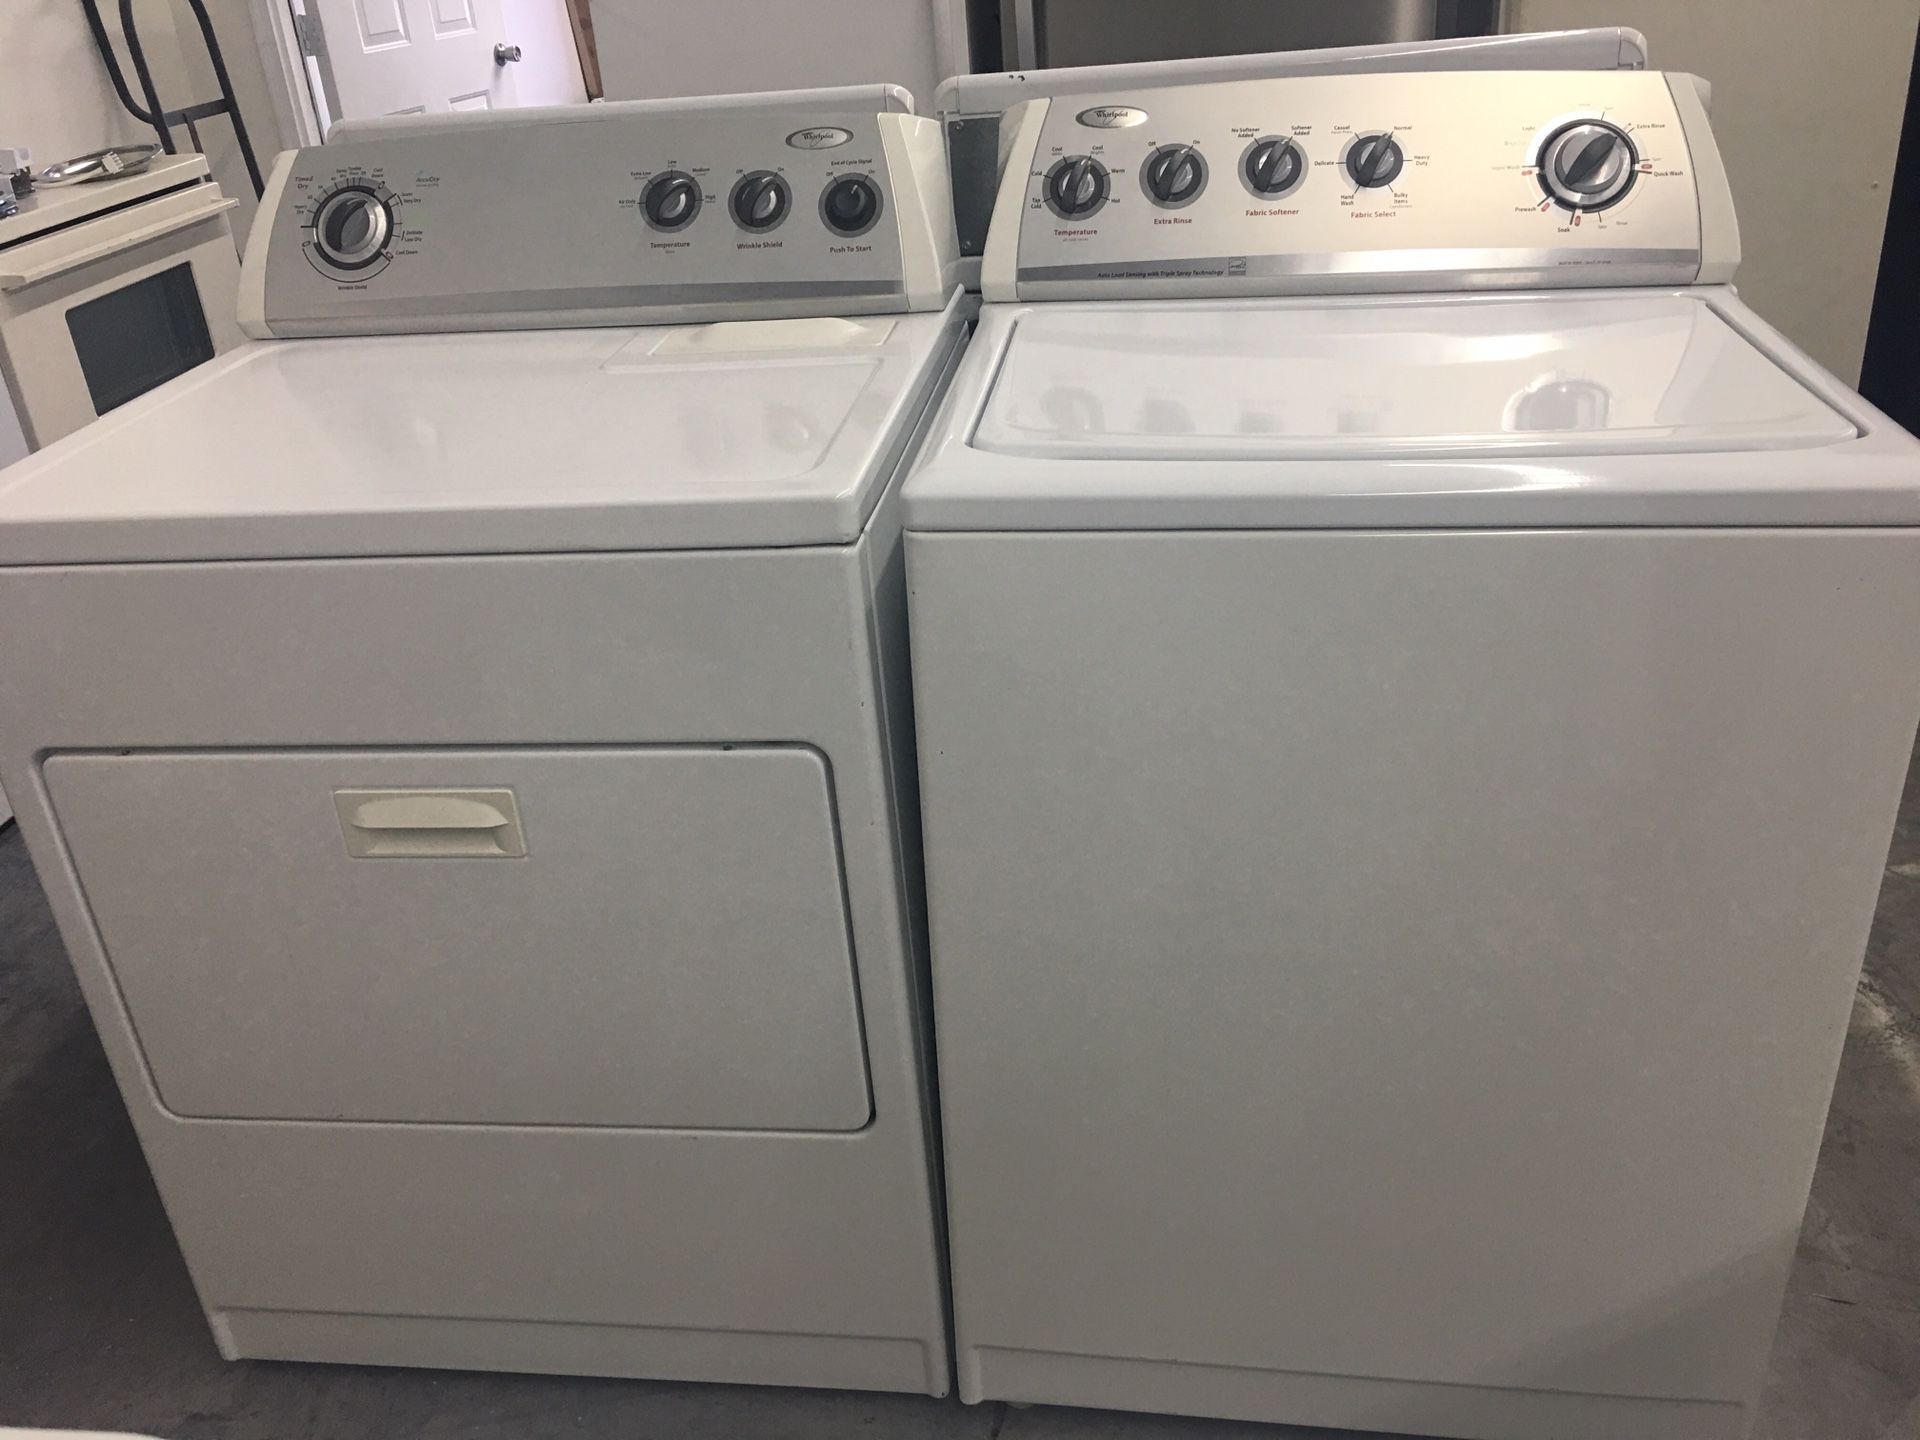 WHIRLPOOL WASHER AND DRYER SET! 5 month warranty